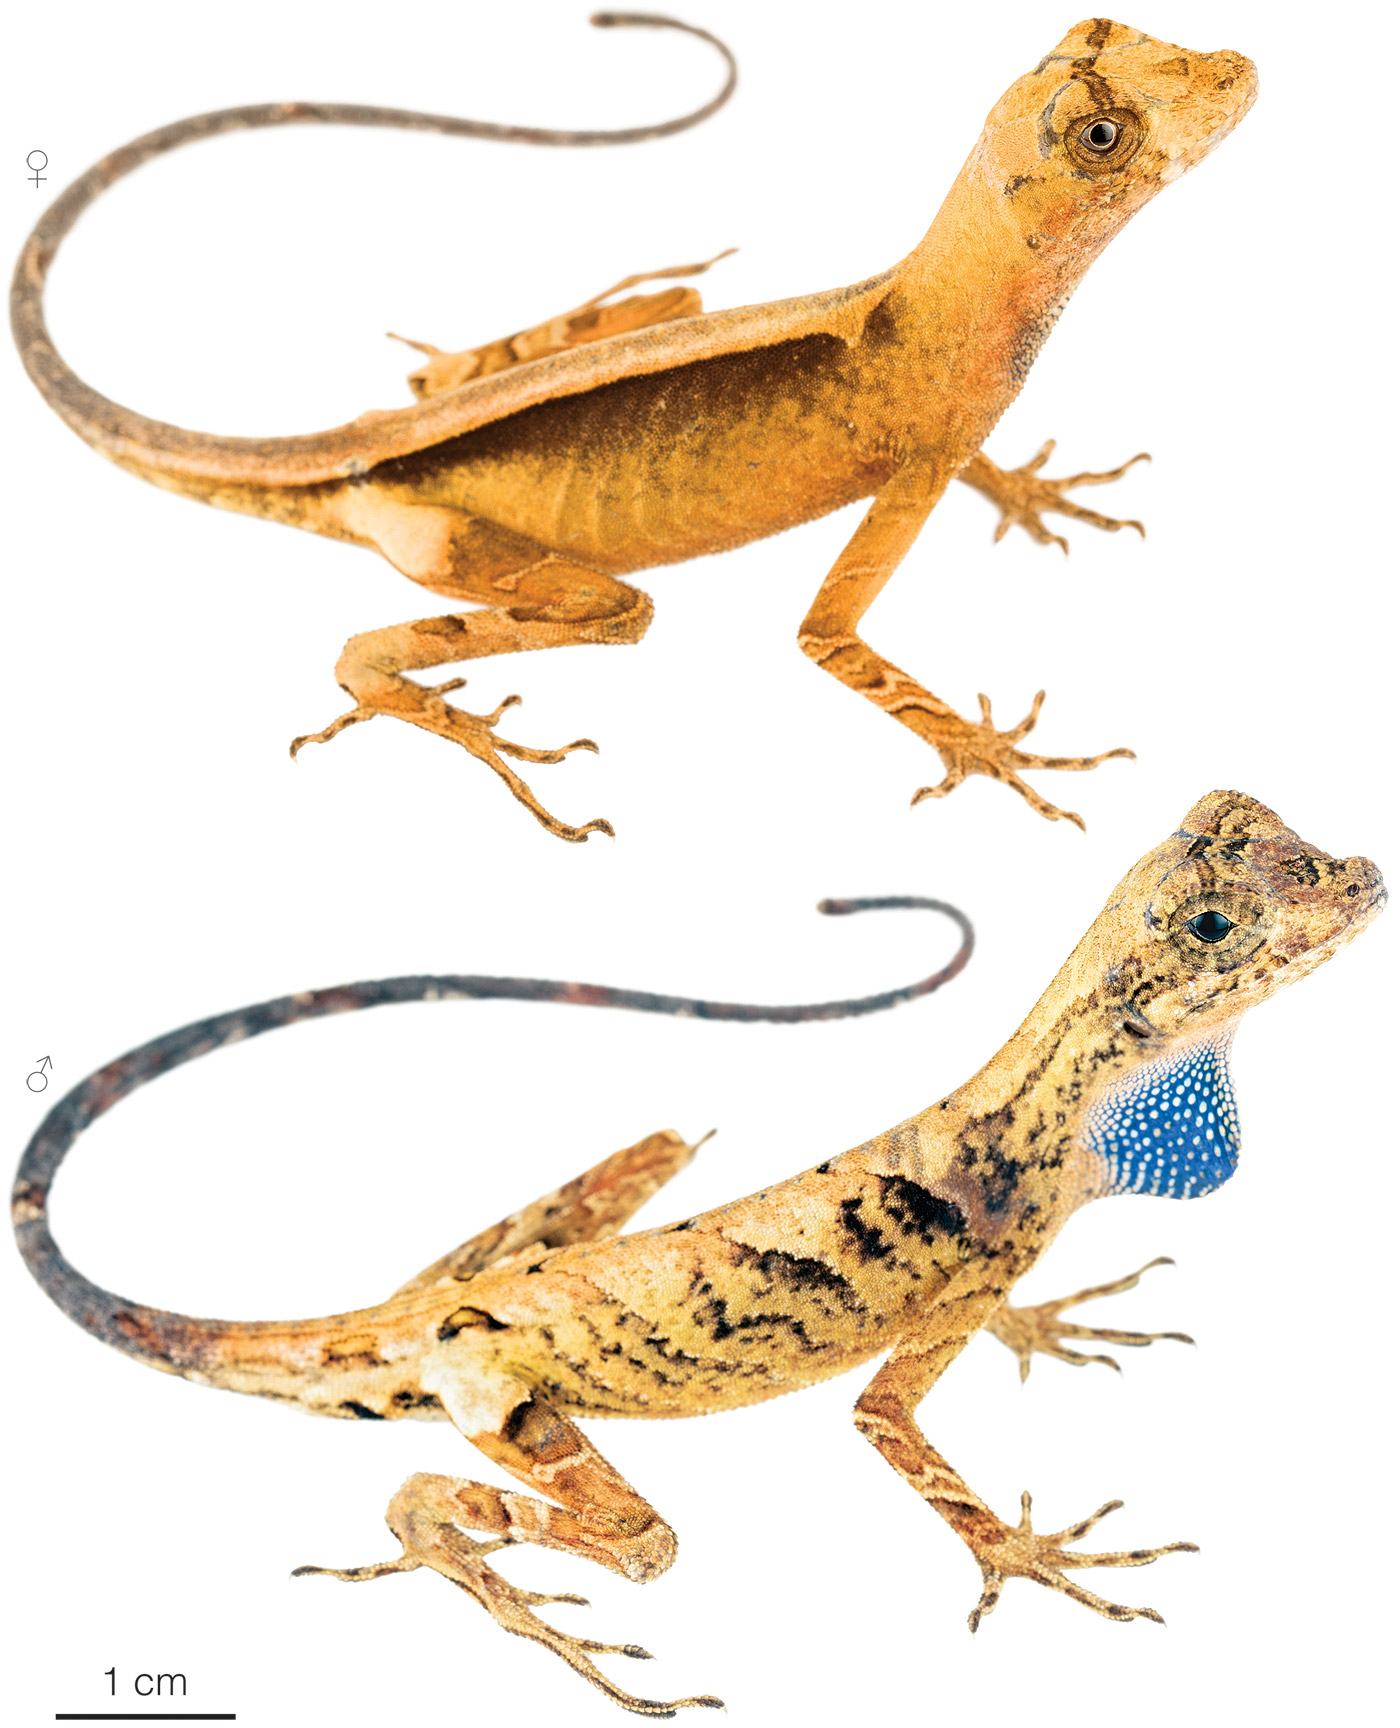 Figure showing variation among individuals of Anolis bombiceps